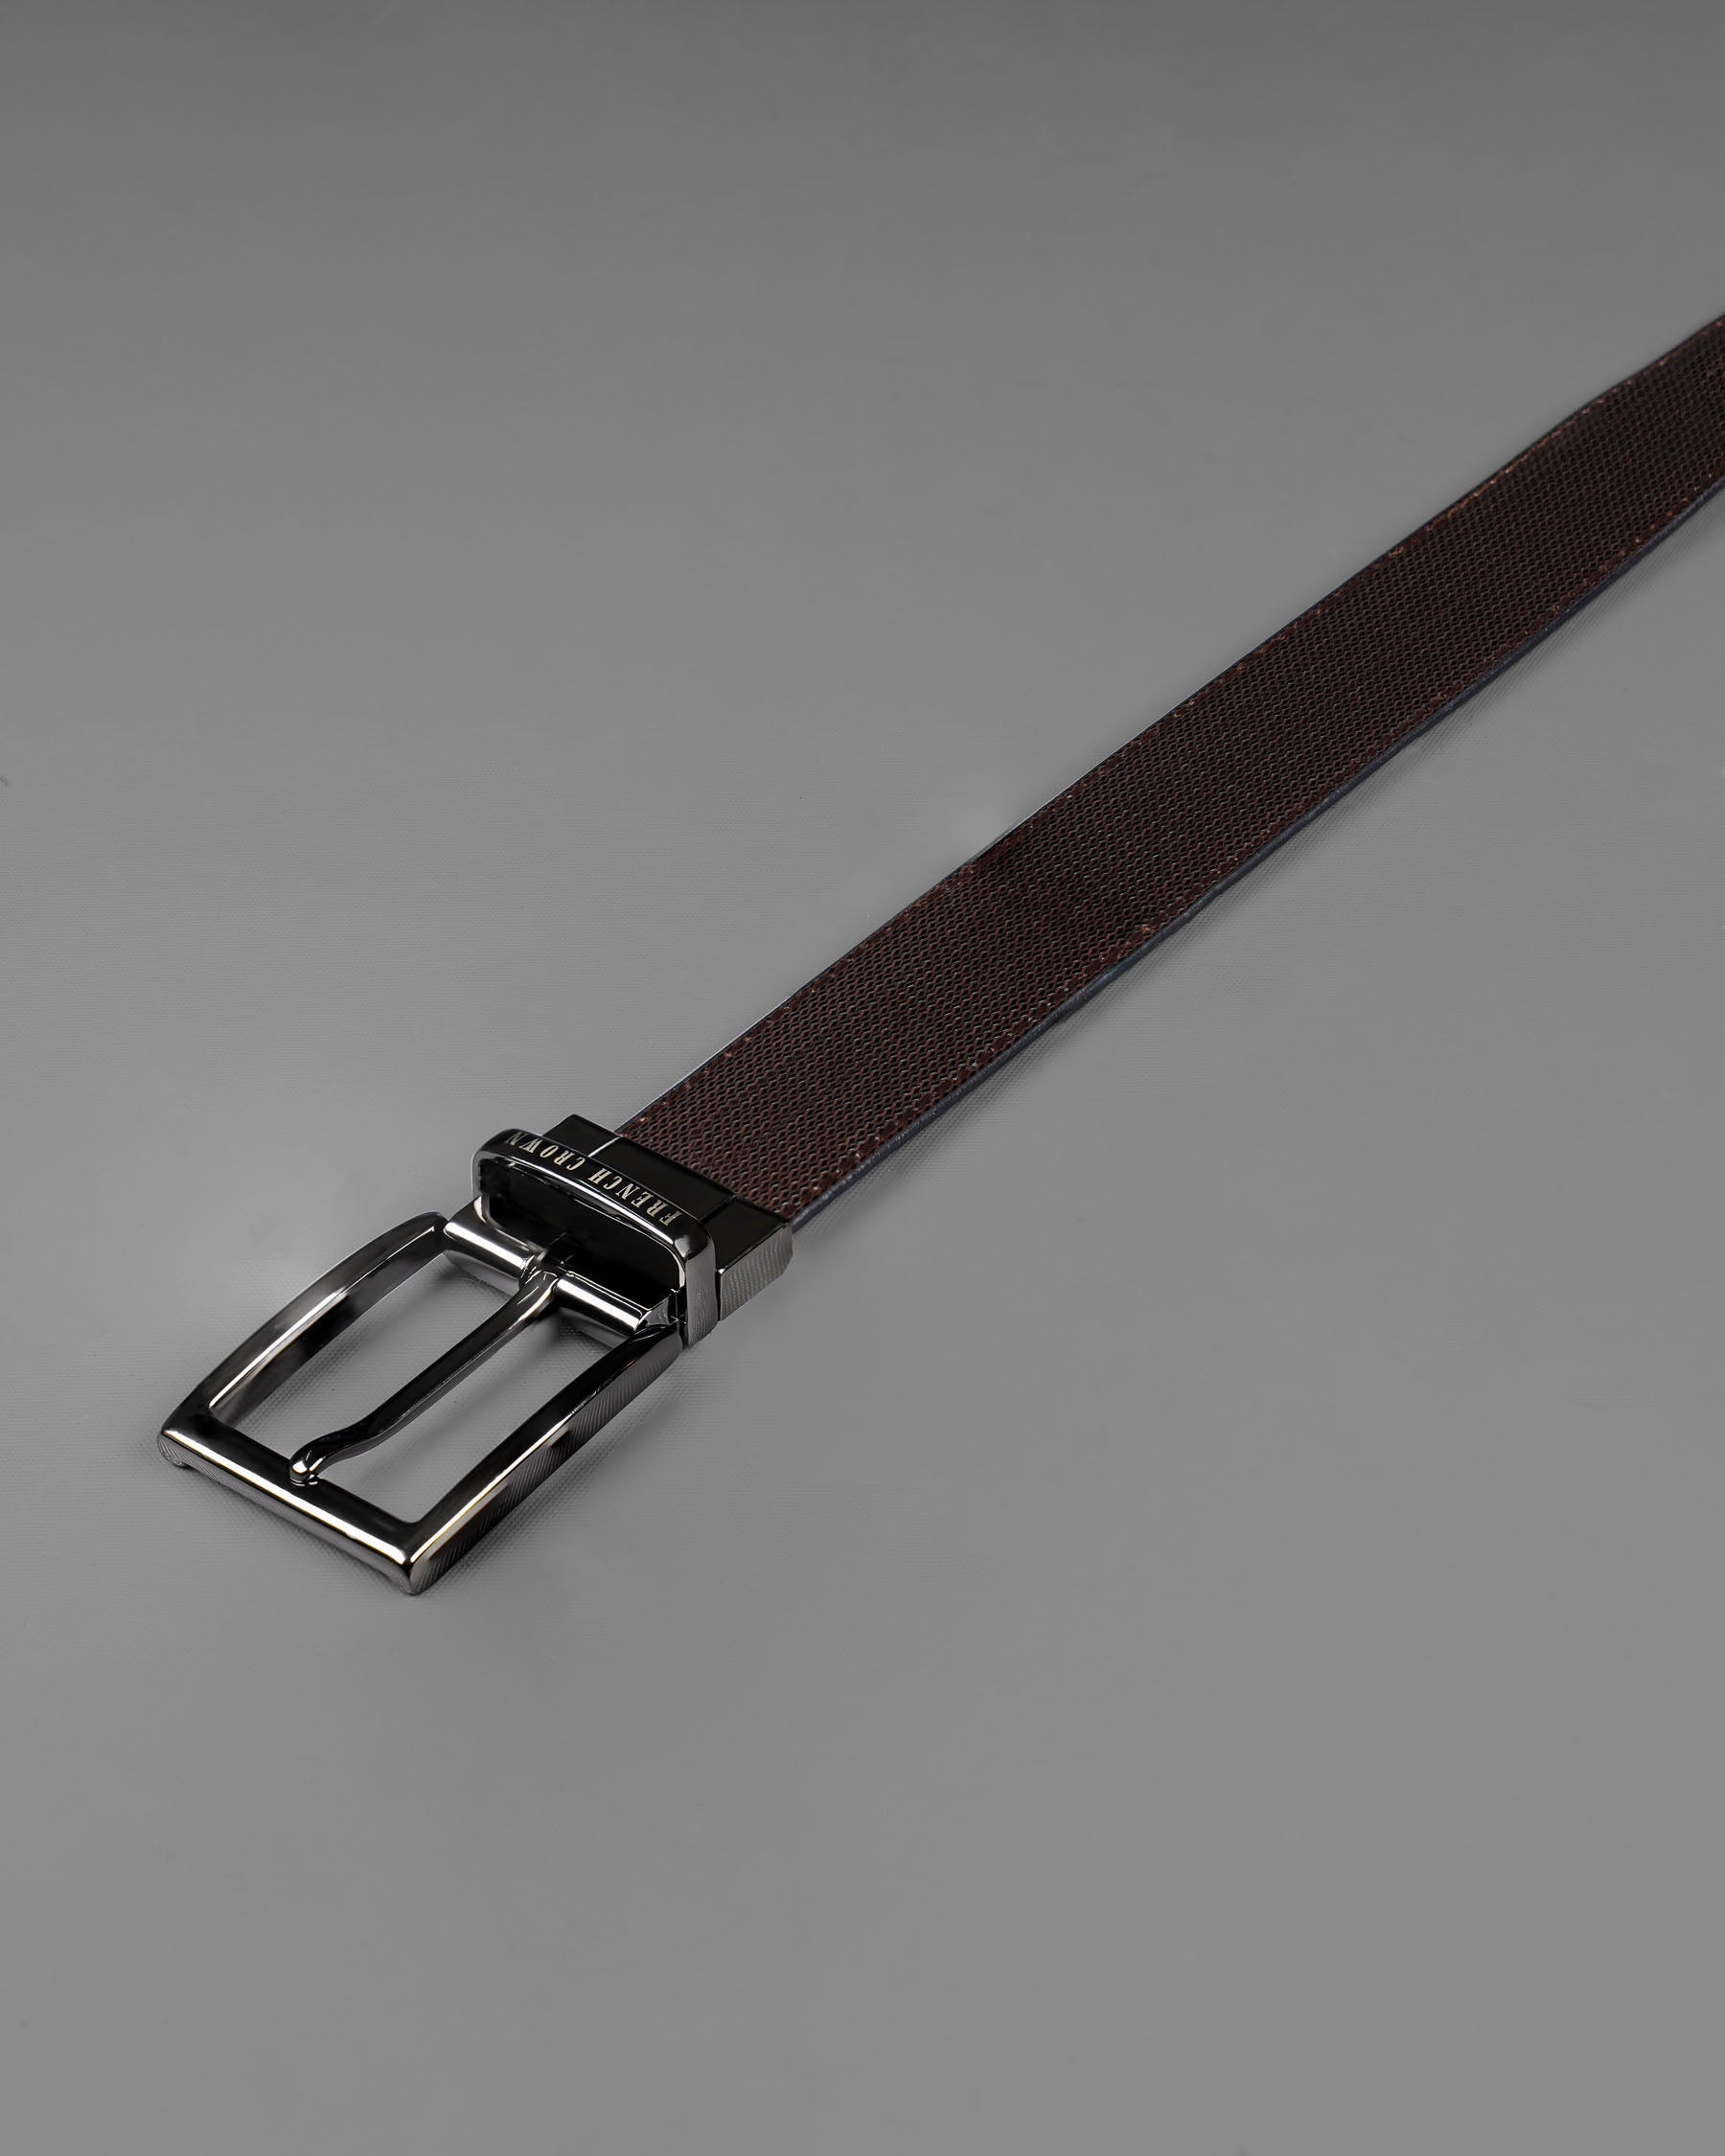 Metallic Gray Buckle with Jade Black and Light Brown Leather Free Handcrafted Reversible Belt